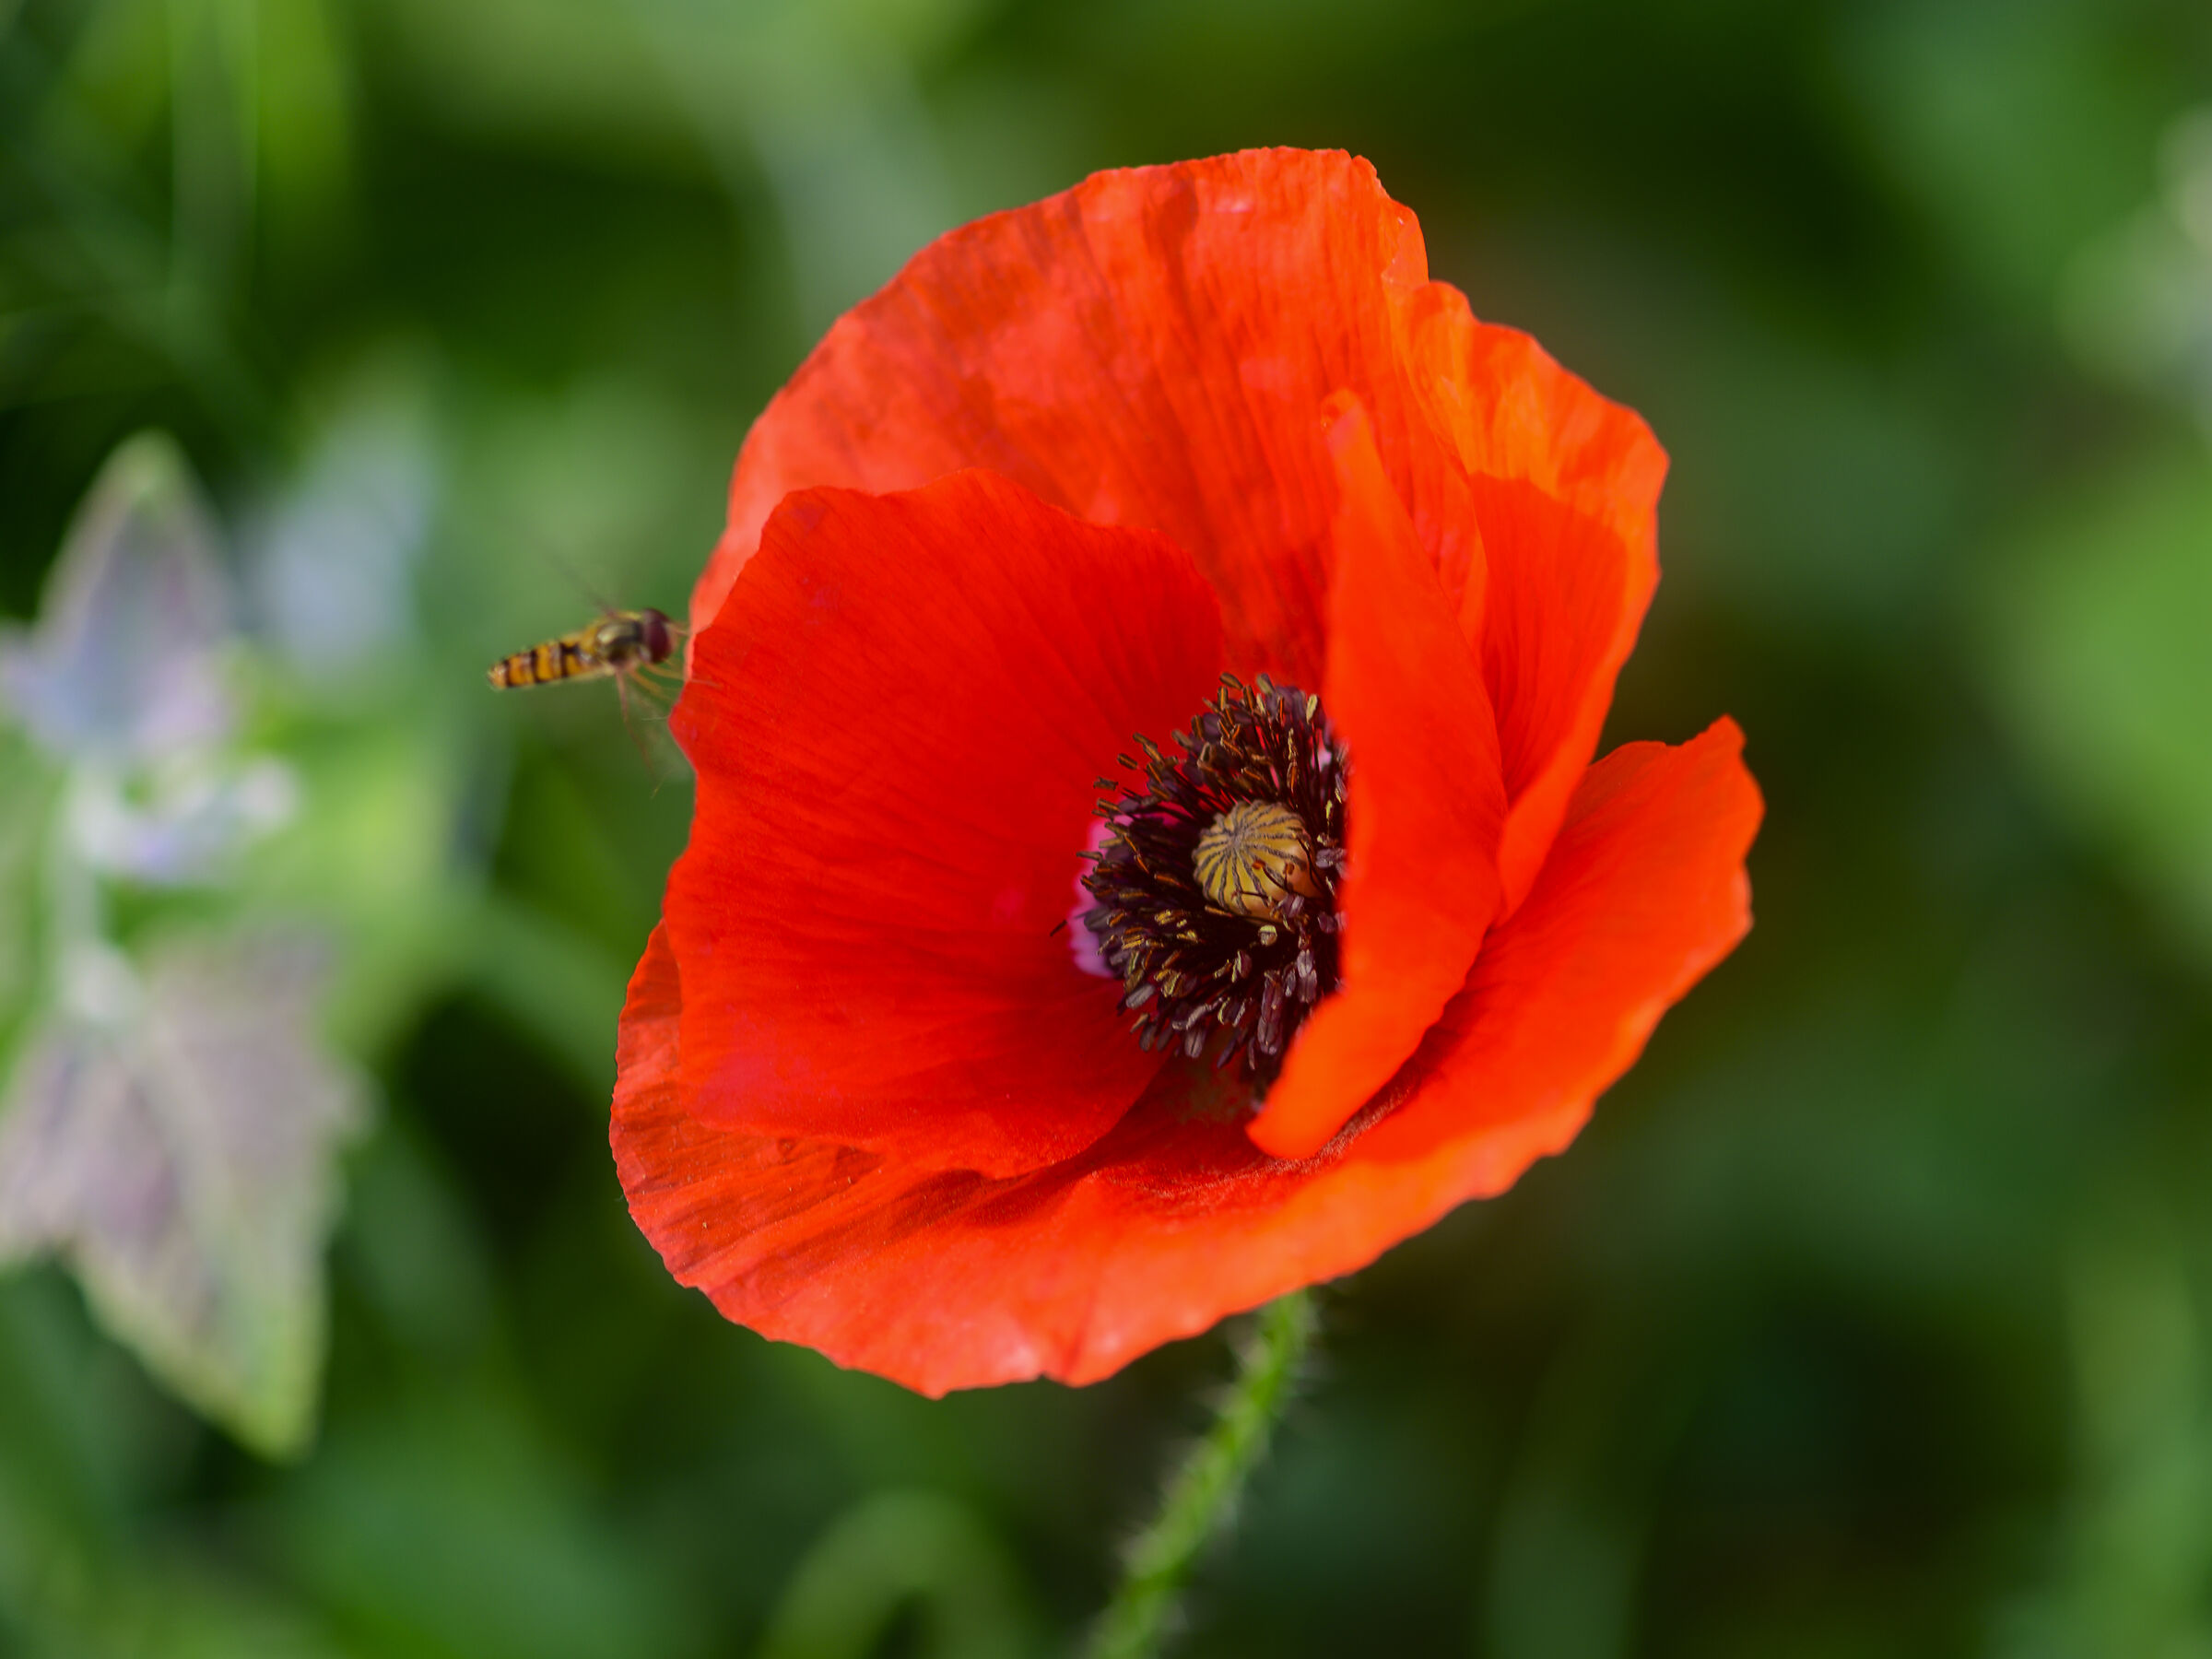 The Bee and the Poppy...